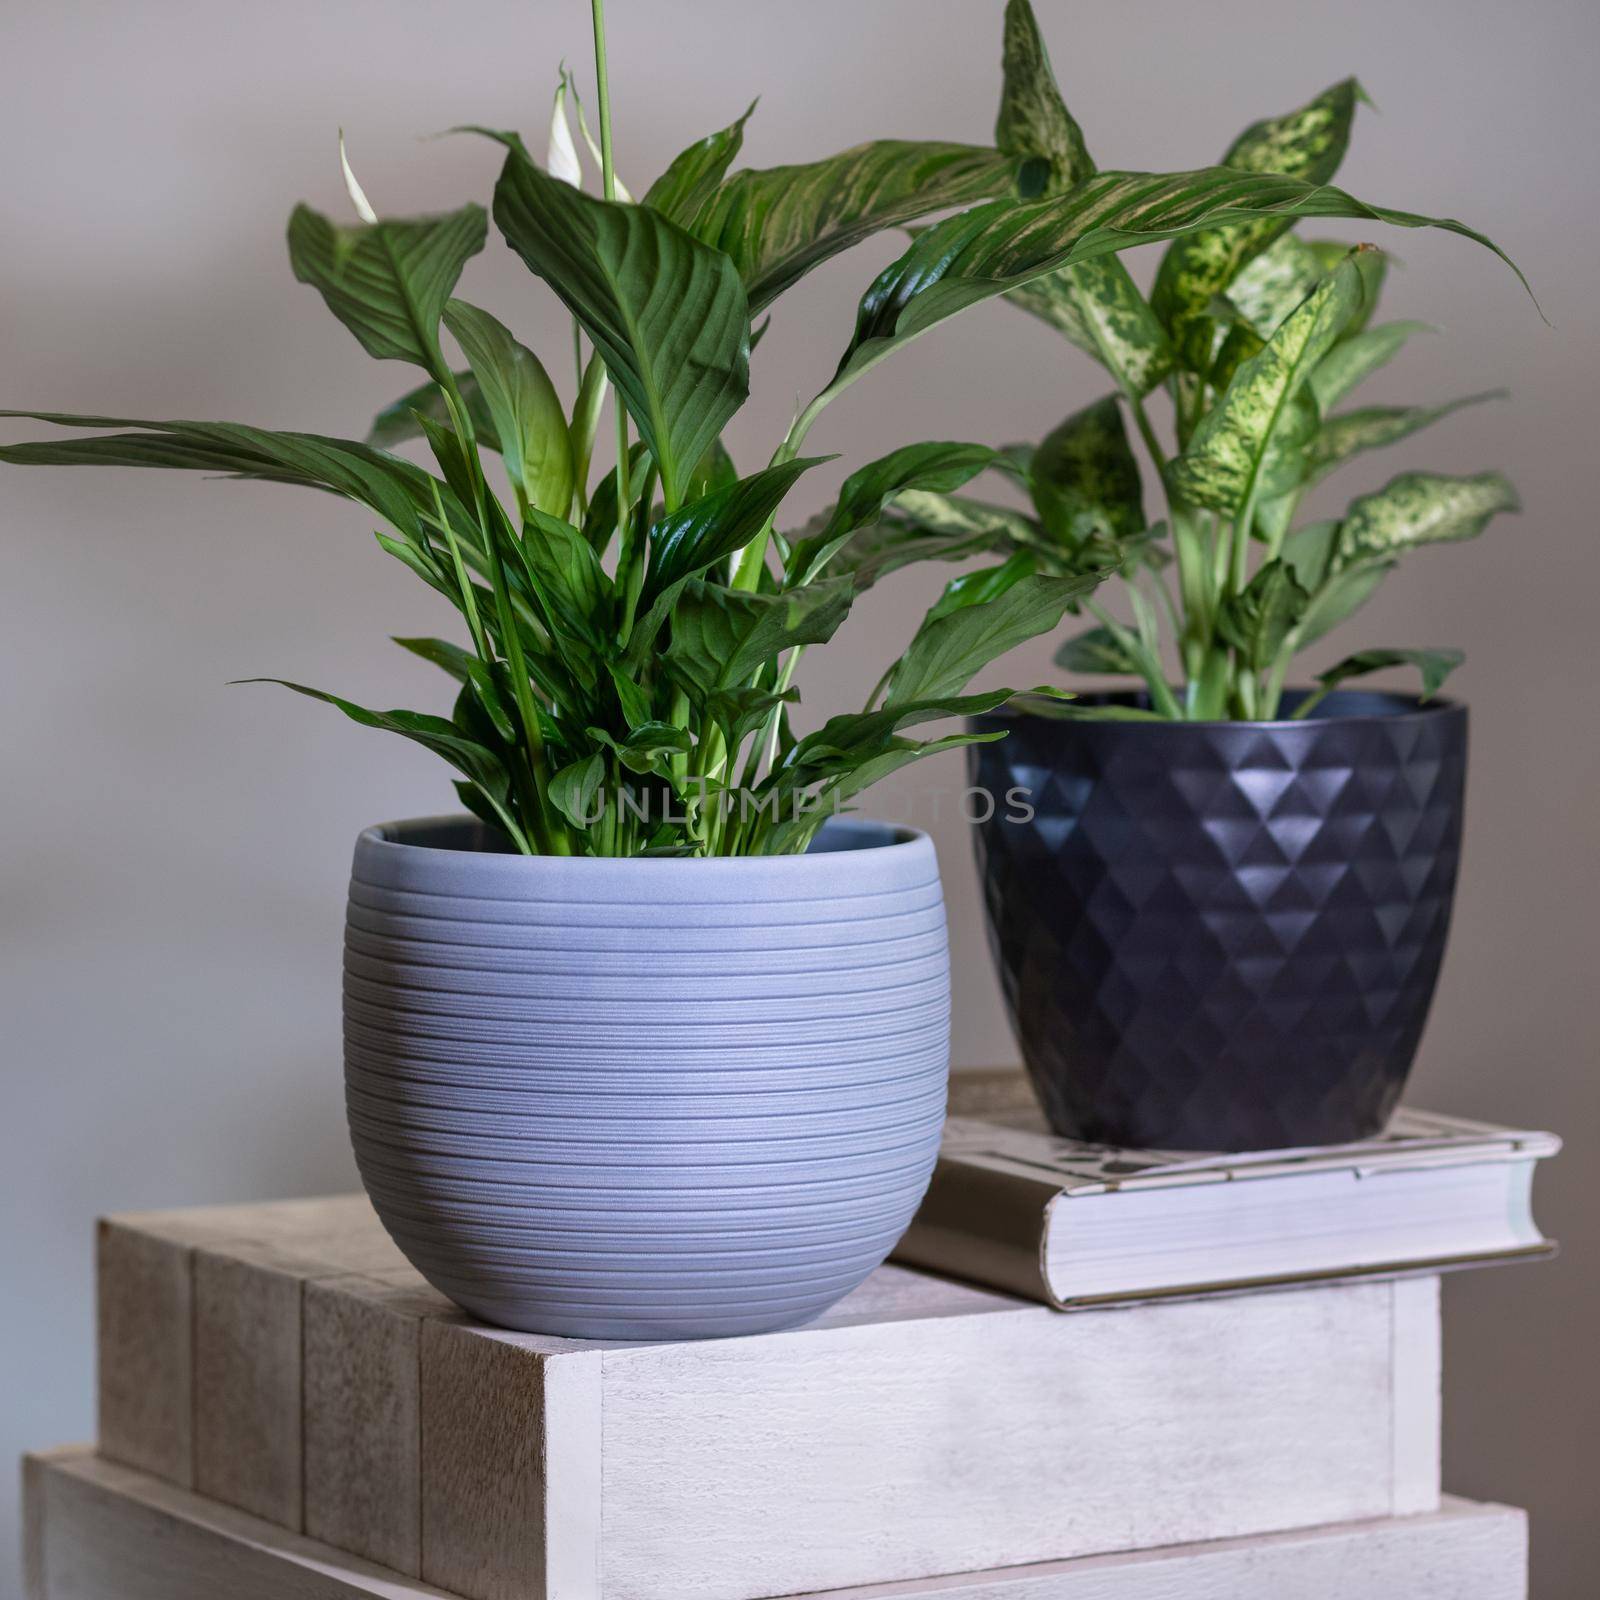 Dieffenbachia Dumb canes with Peace Lily, Spathiphyllum plant by ferhad